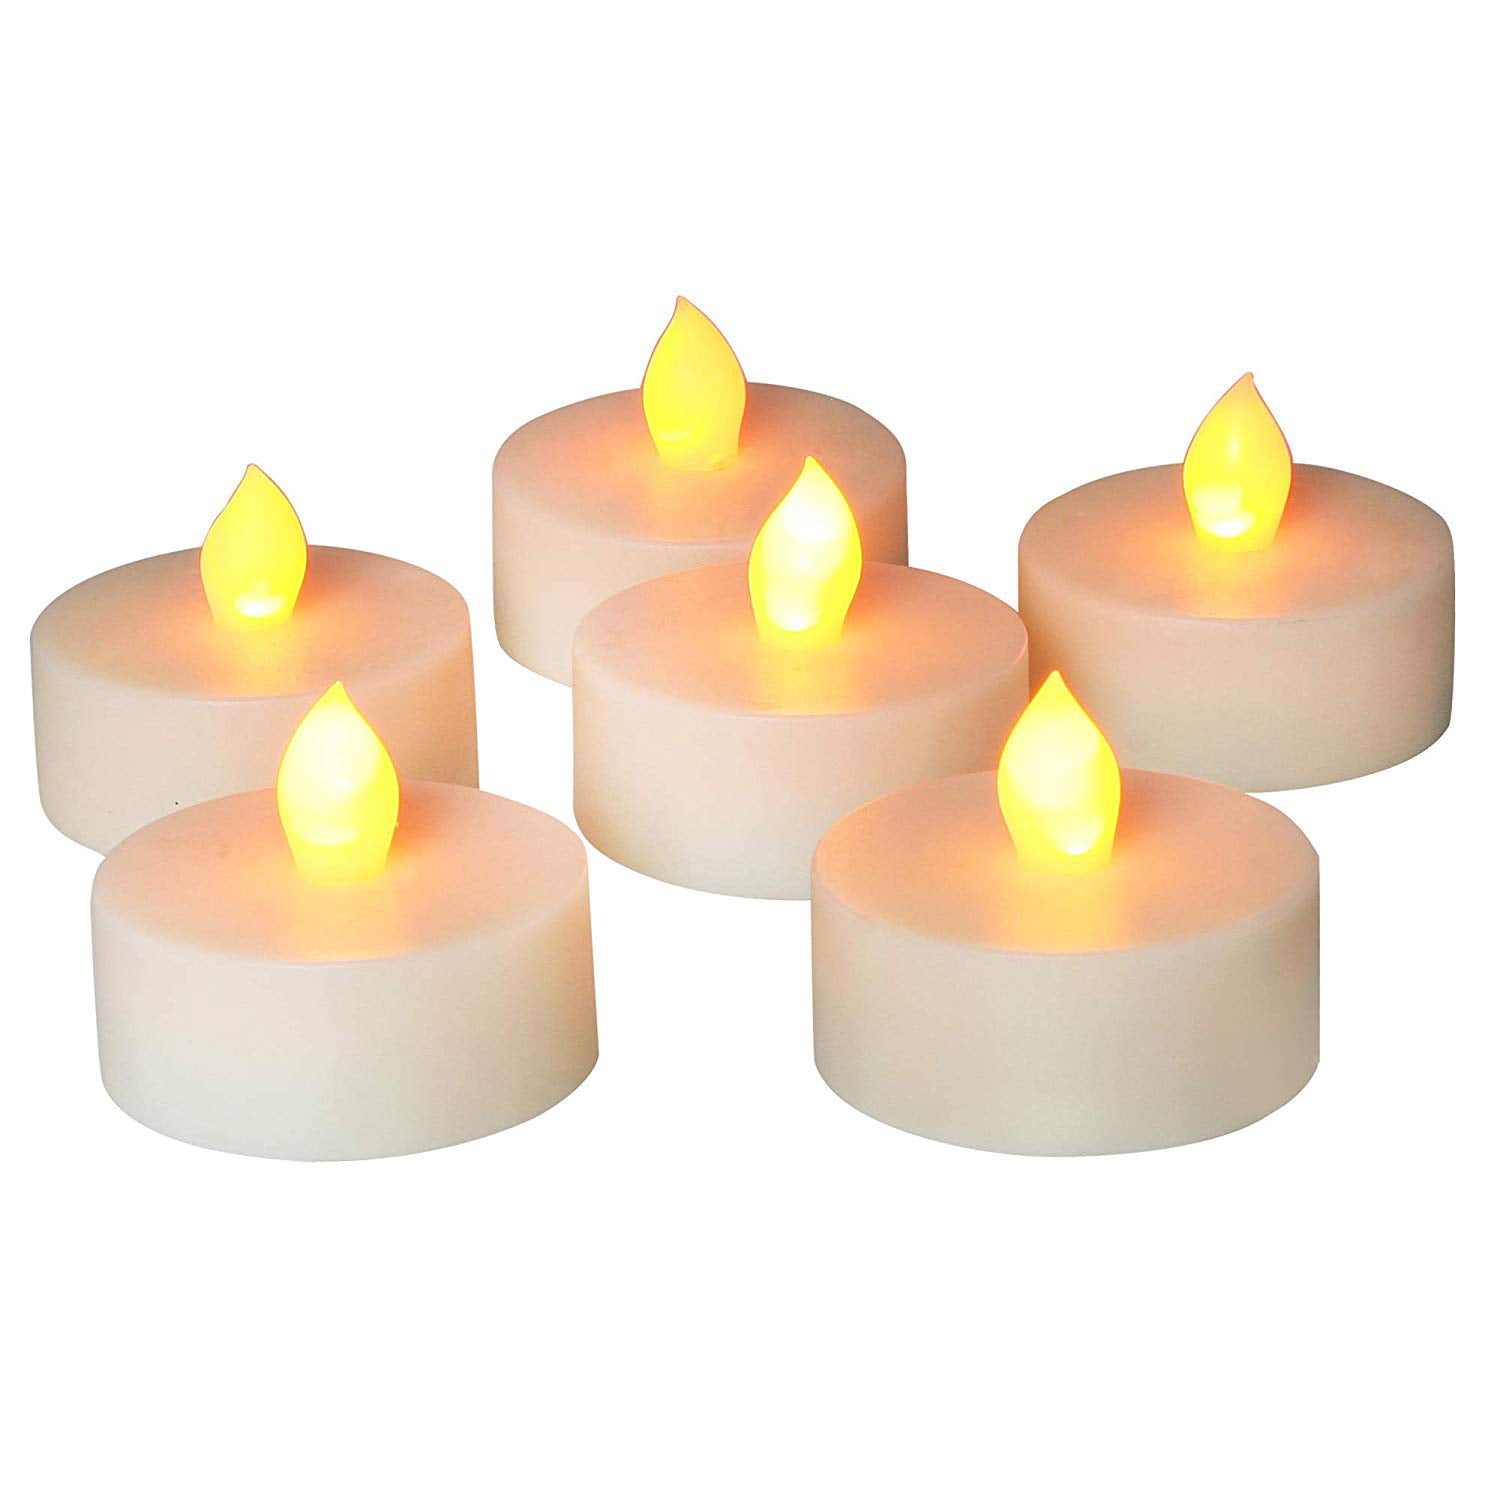 Battery LED Candle Lights Romantic Party Wedding Electric Flickering Tealights 